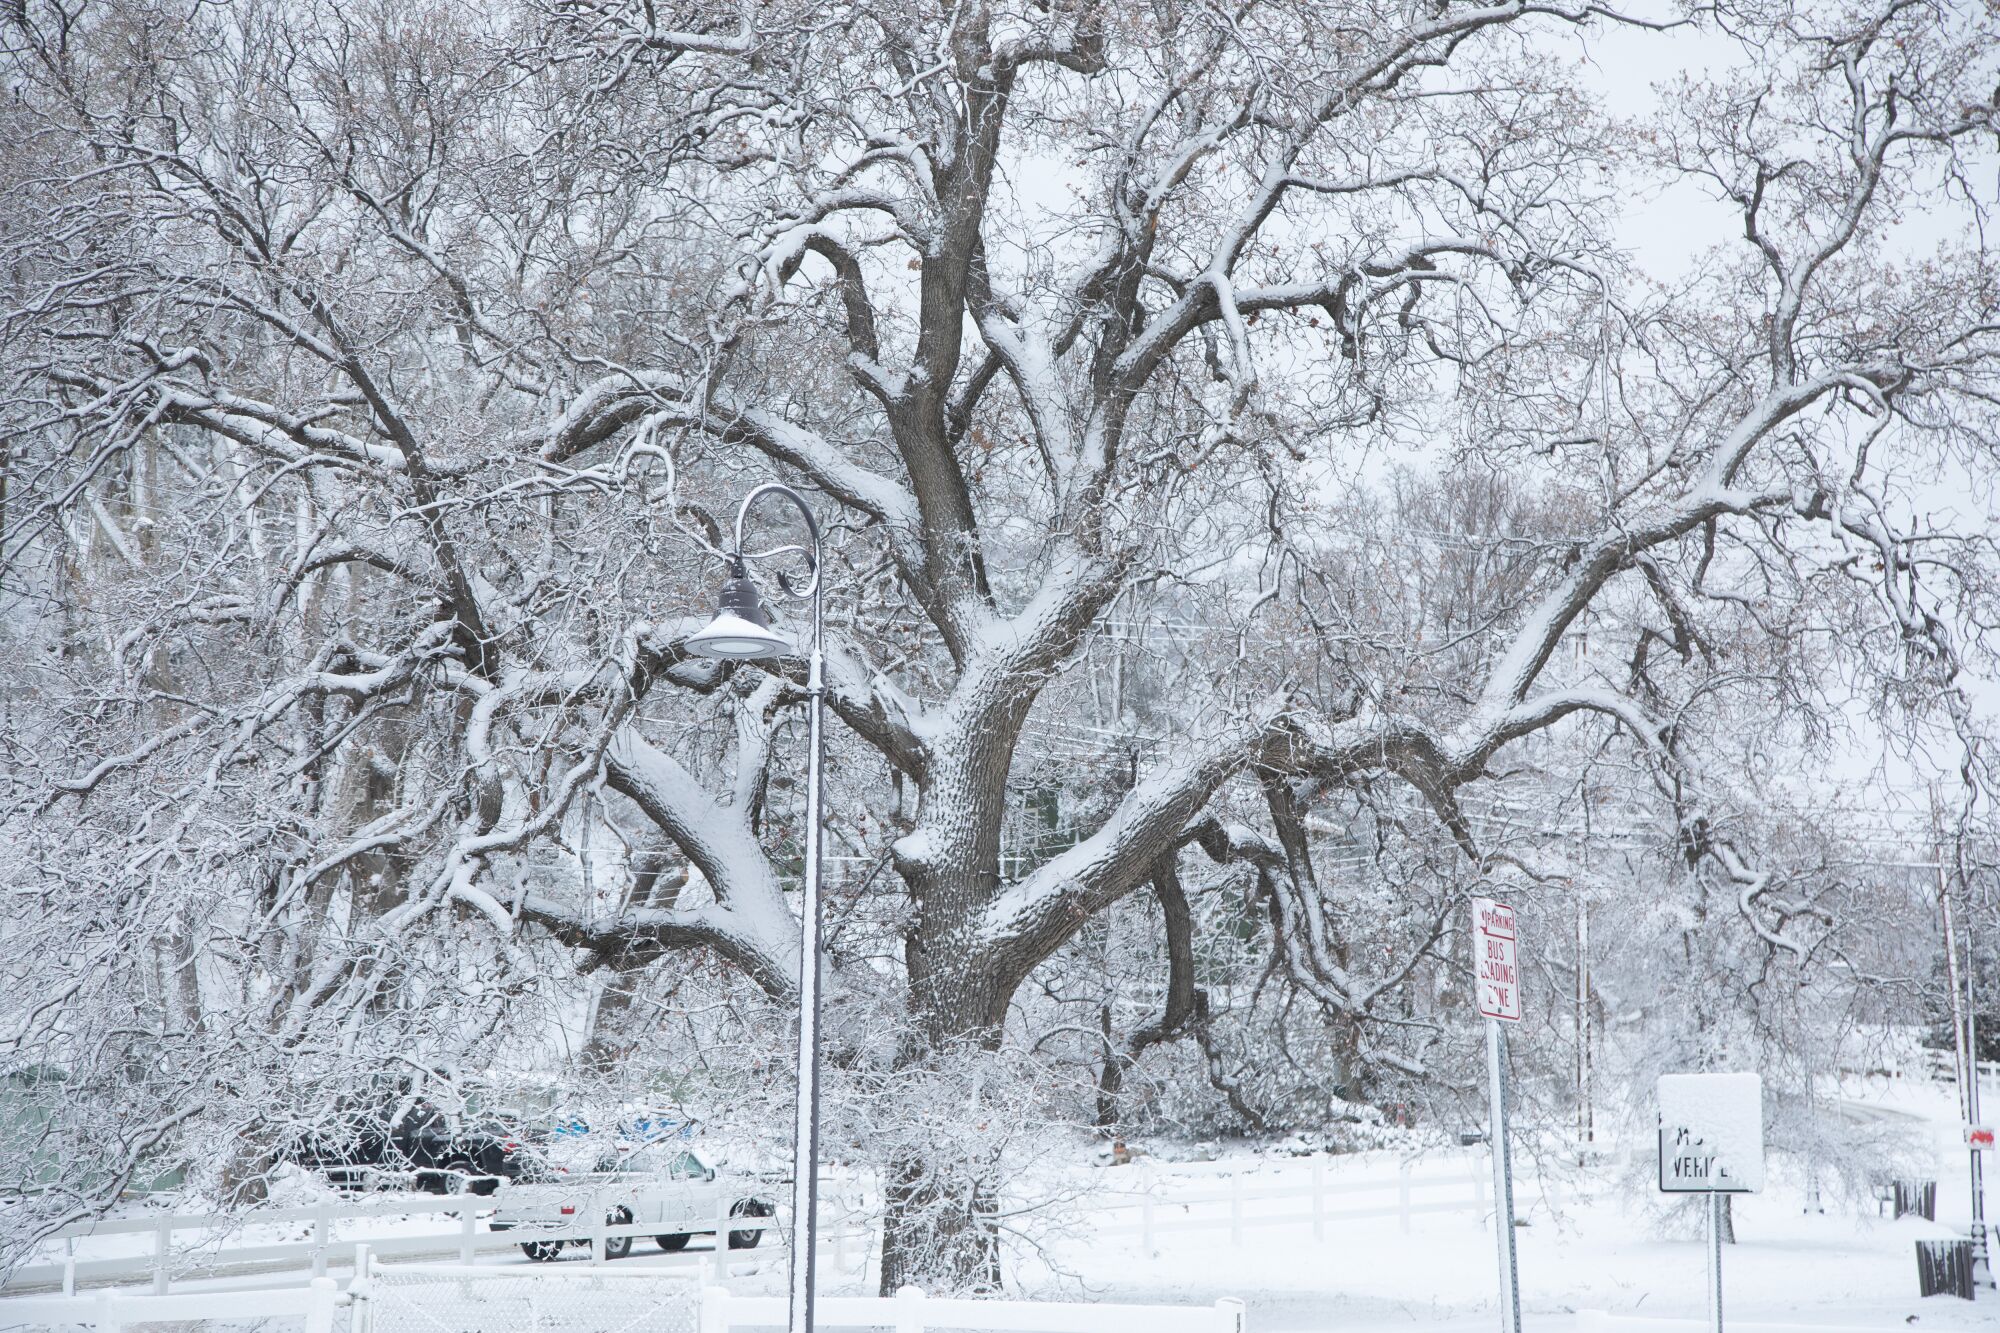 The Kern County community of Frazier Park was blanketed in snow after a winter storm swept through the region.